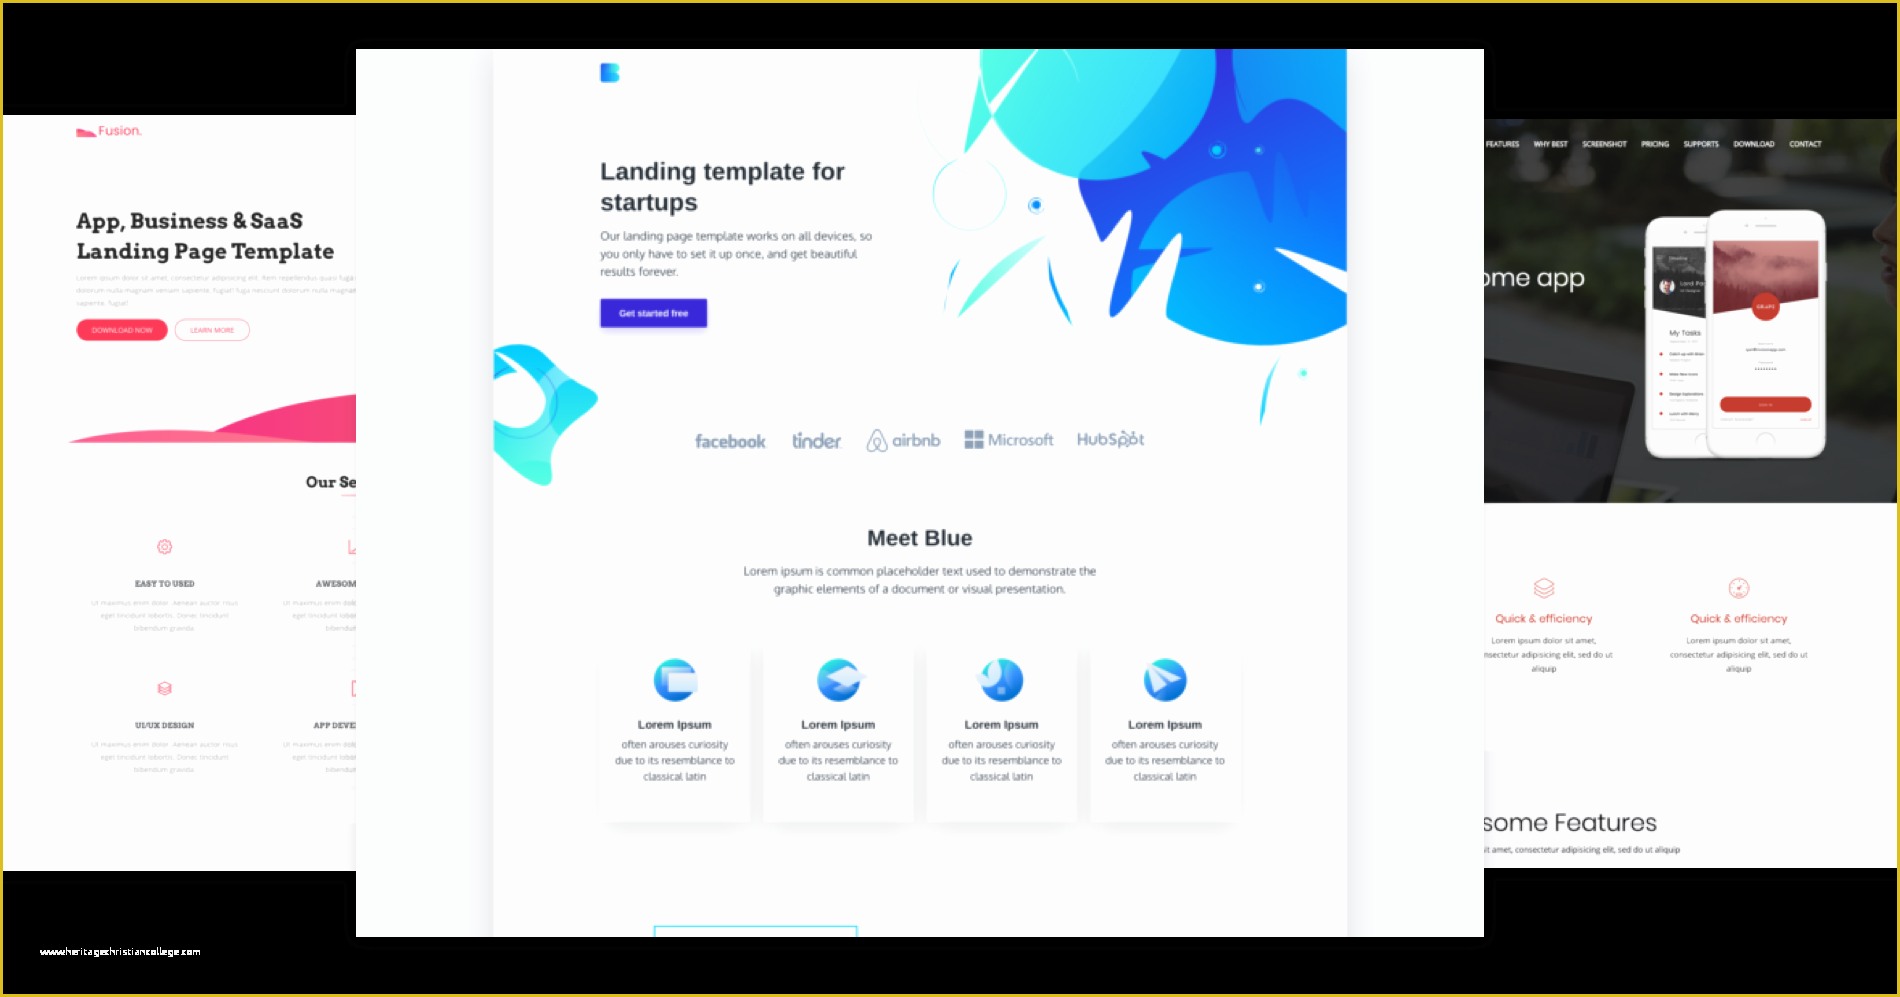 Free Landing Page Templates Of 22 Best Free App Landing Page Templates You Need to See now